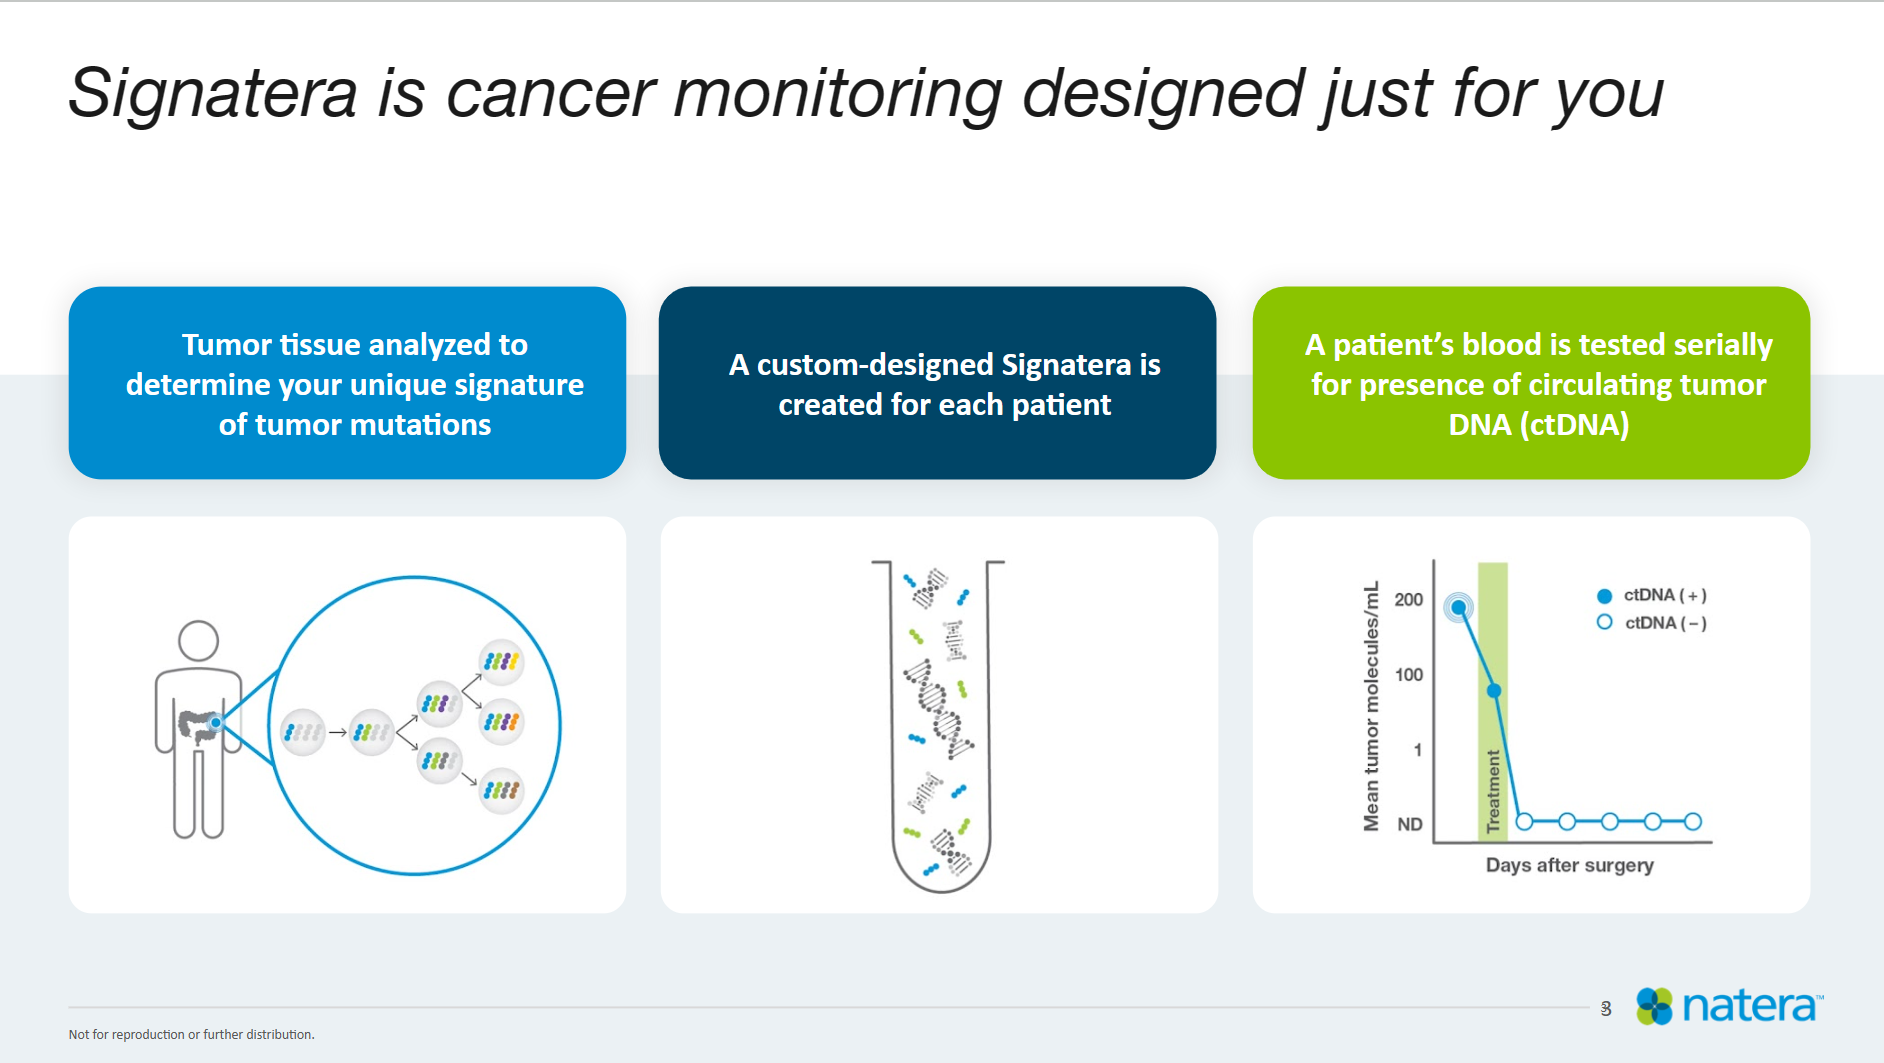 A slide with three steps explaining how Signatera tests for a cancer recurrence: tumor tissue is analyzed, a custom Signatera is created, and patient blood is tested.